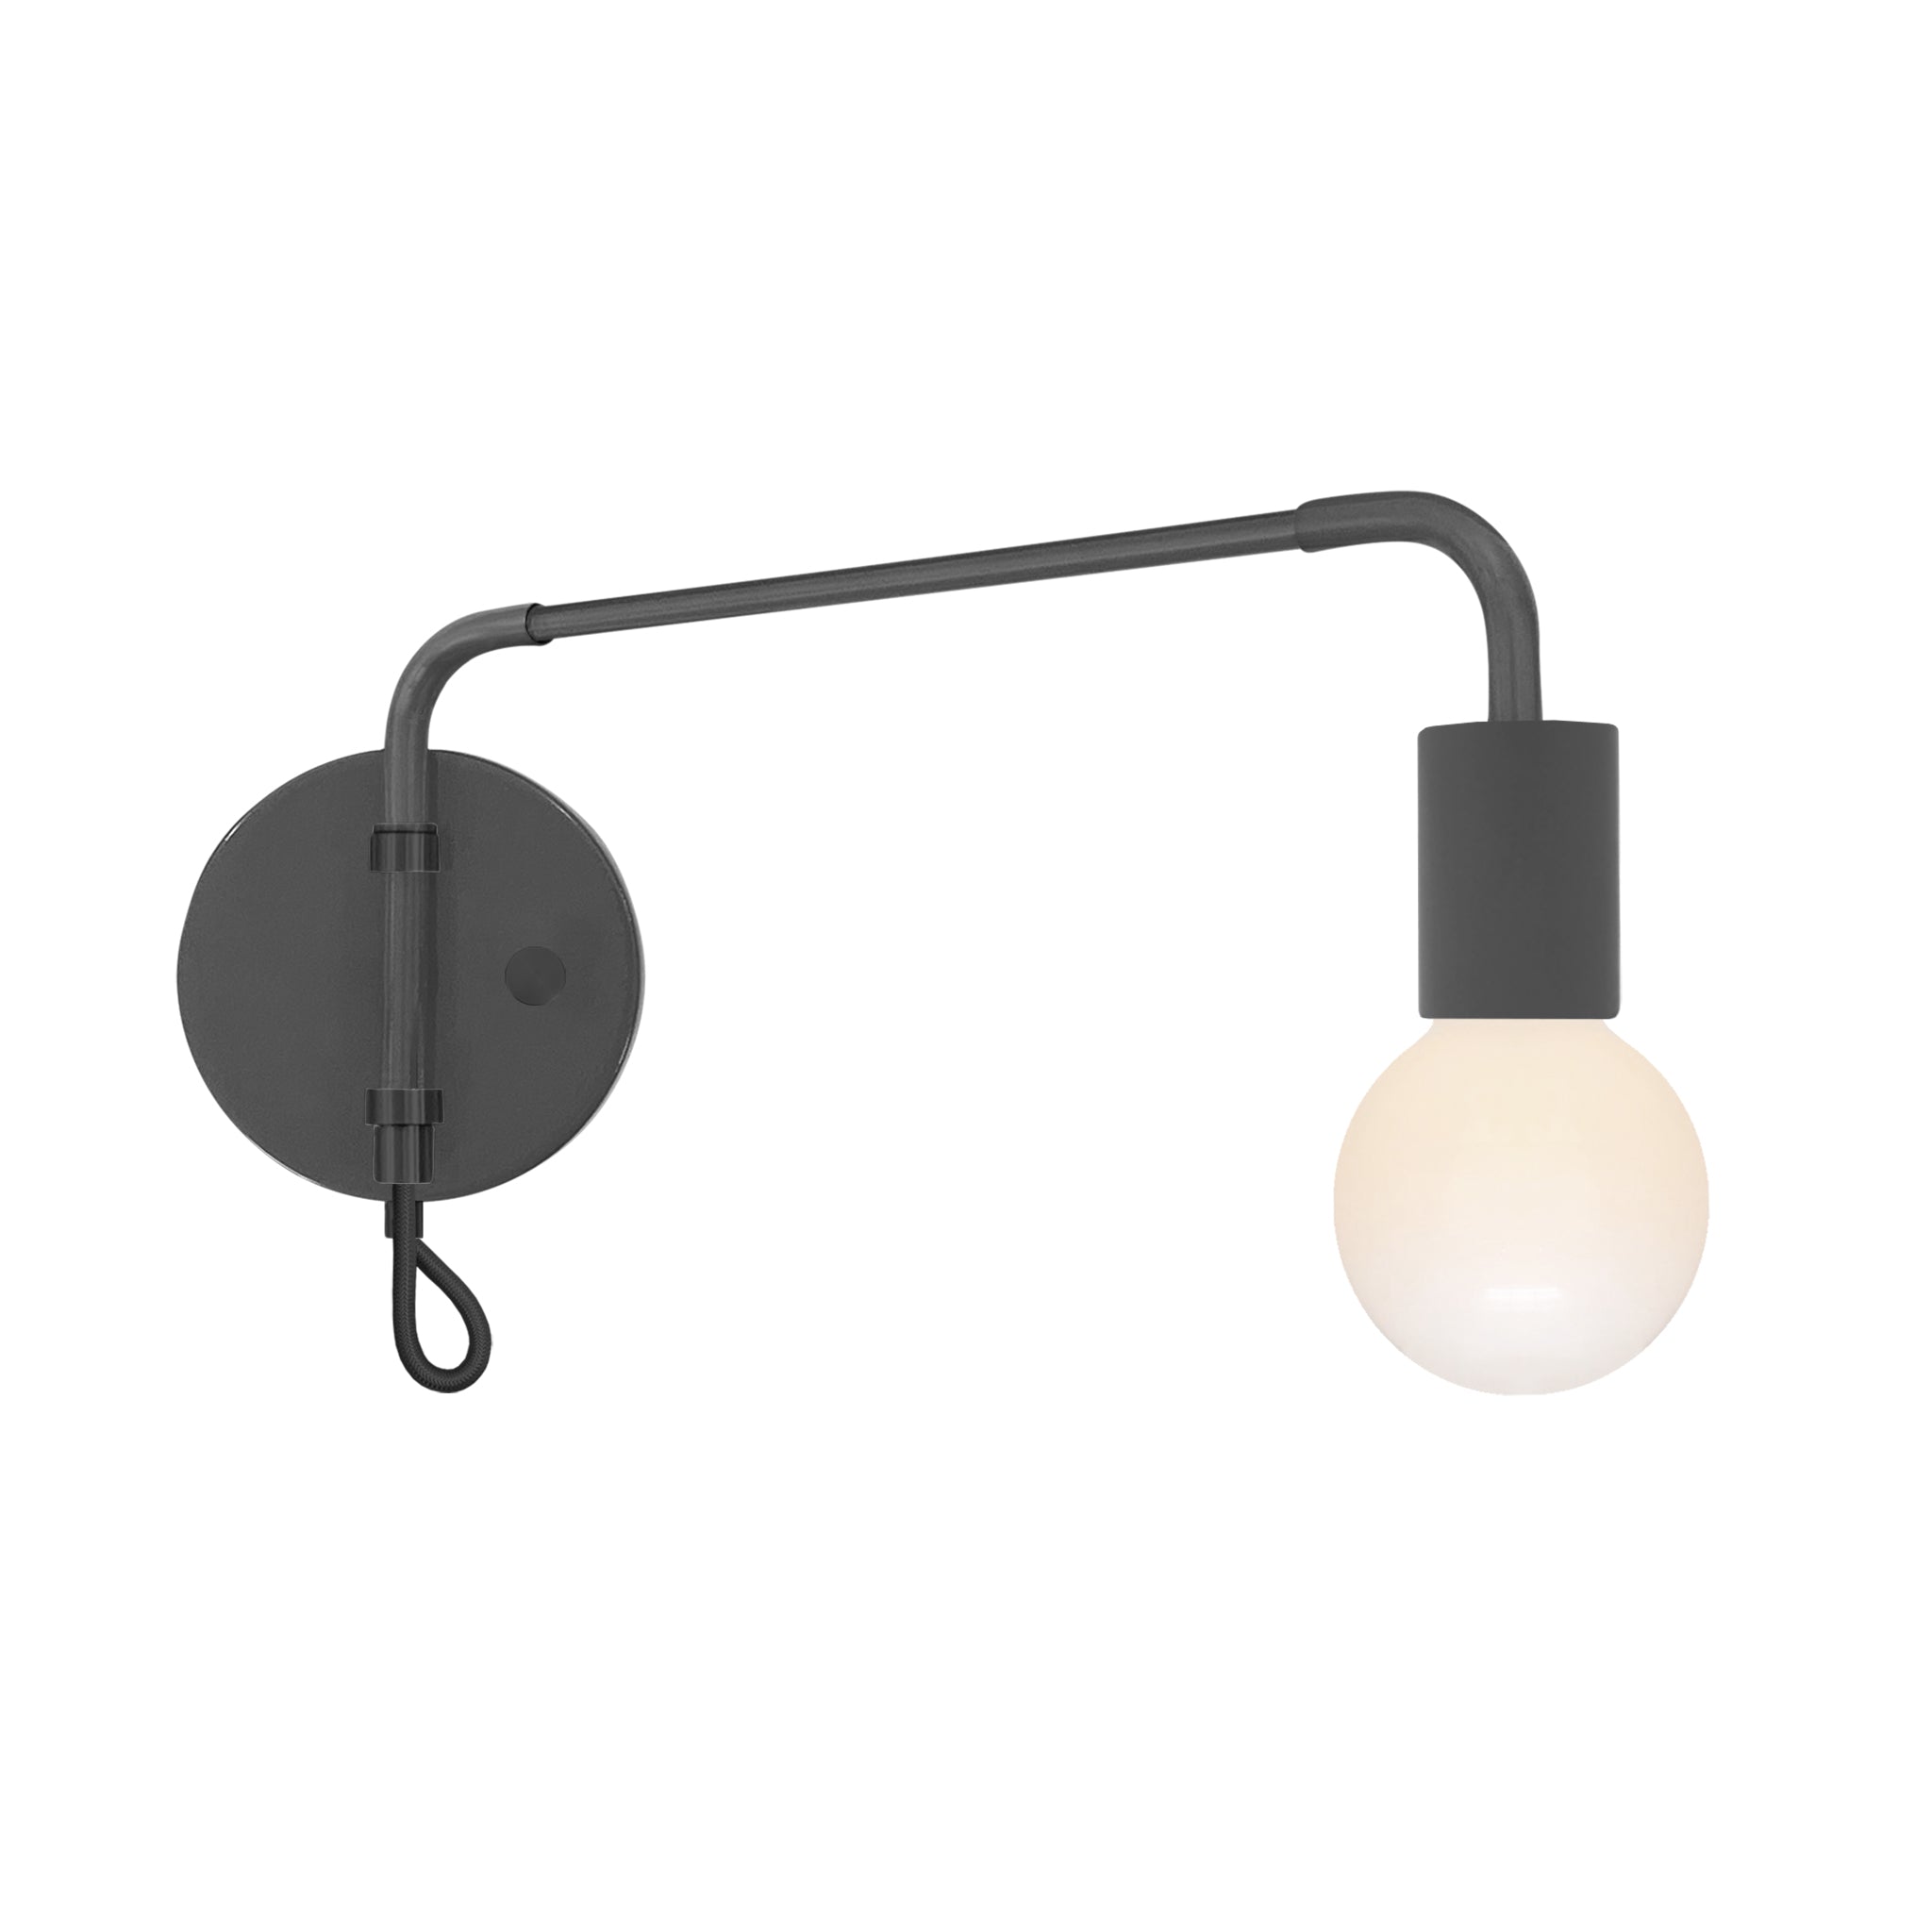 Black and charcoal color Sway sconce Dutton Brown lighting